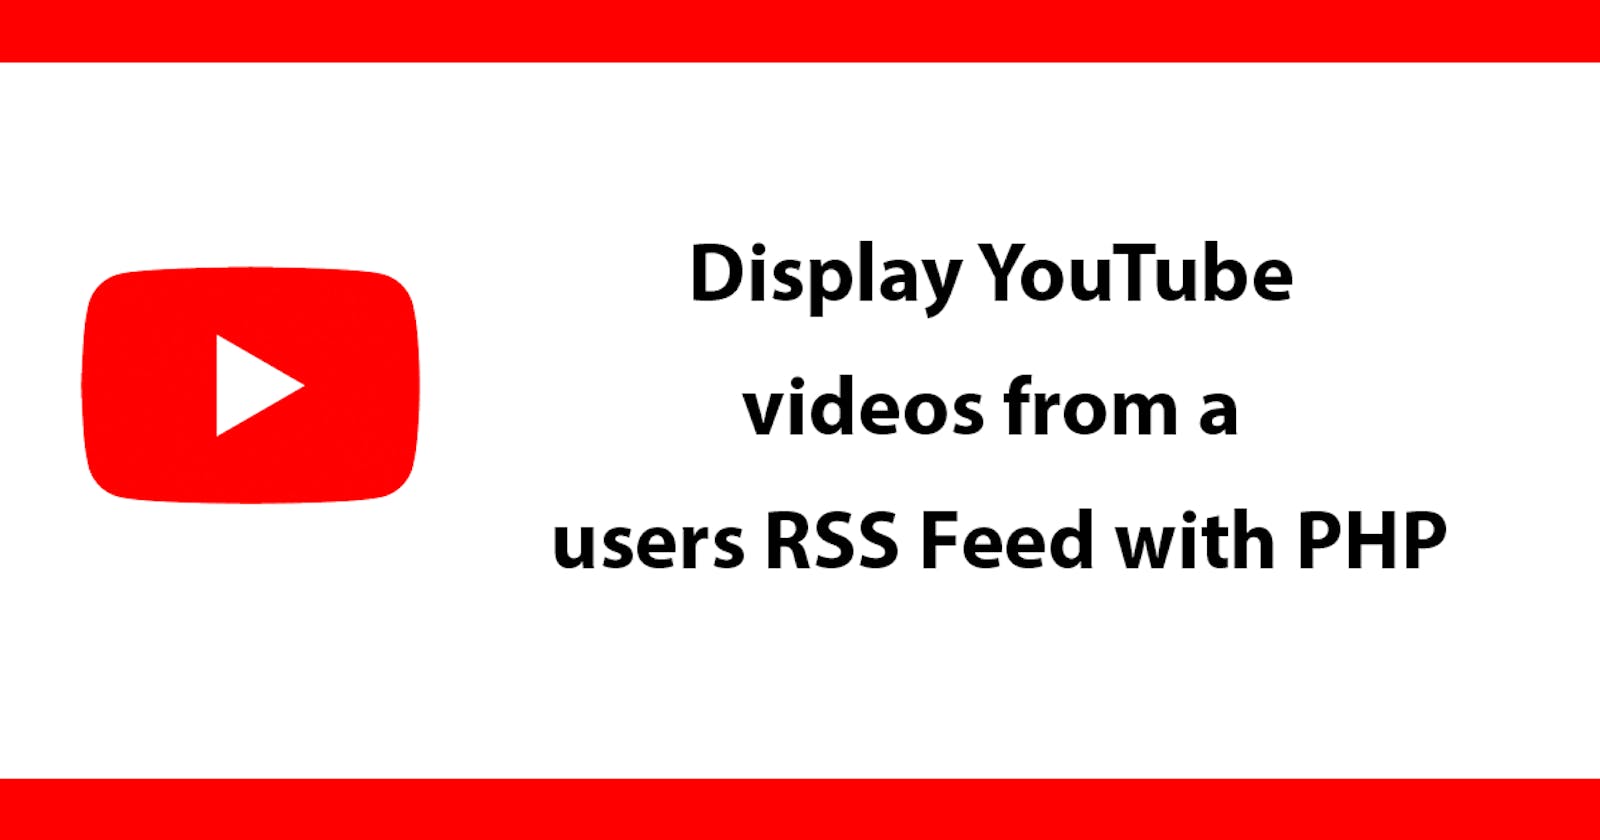 Display YouTube videos from a users RSS Feed with PHP